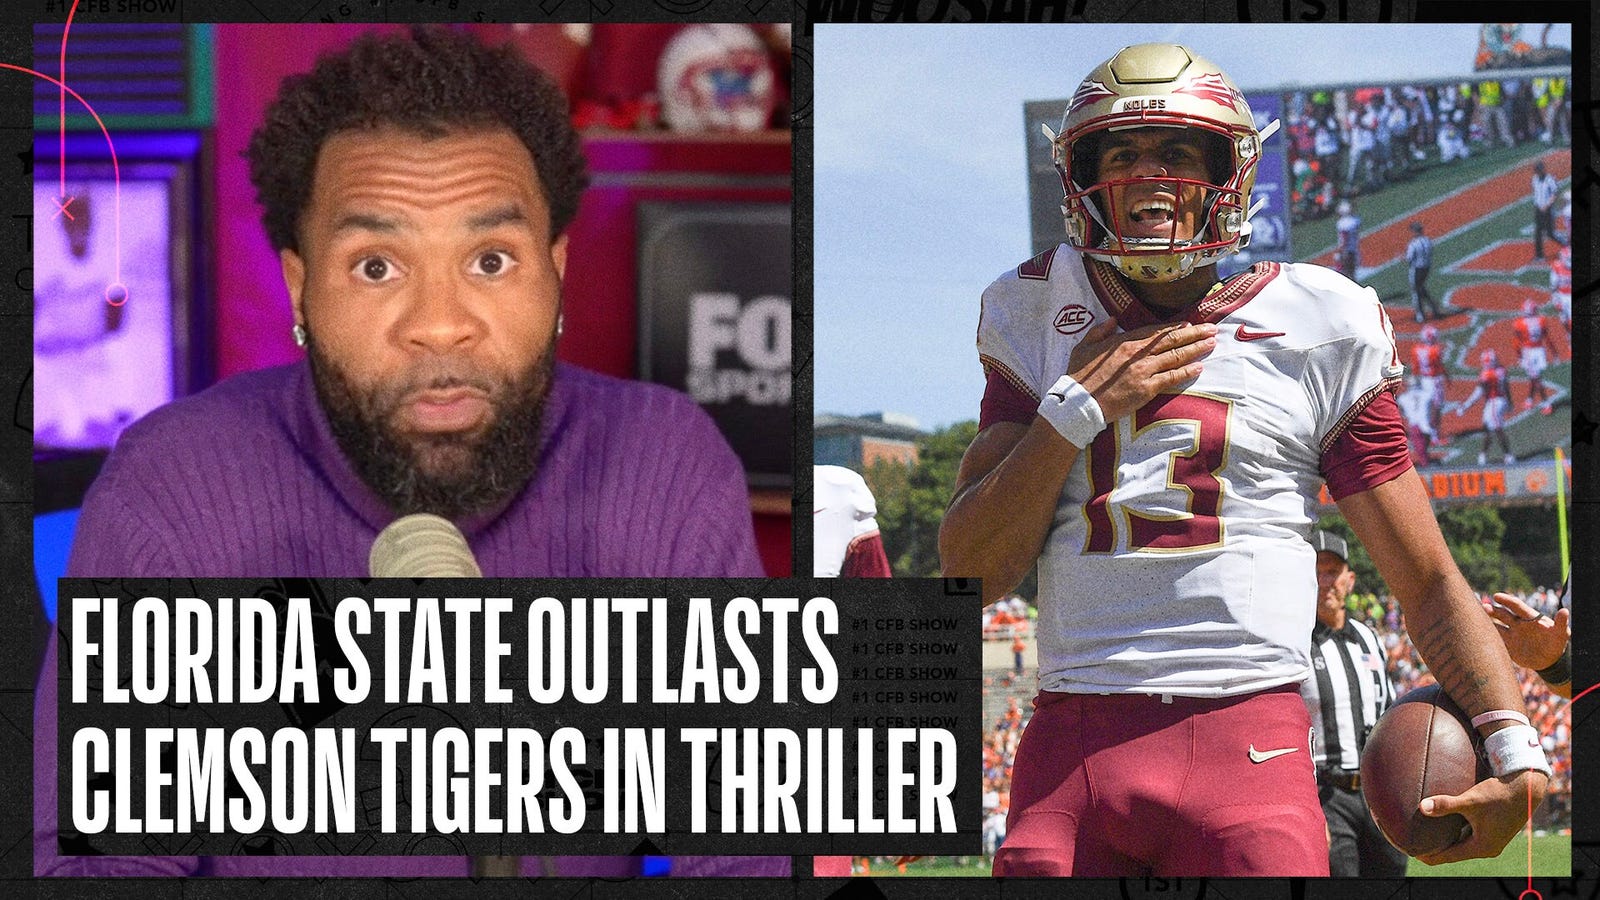 Did Florida State's win over Clemson EXPOSE weaknesses?